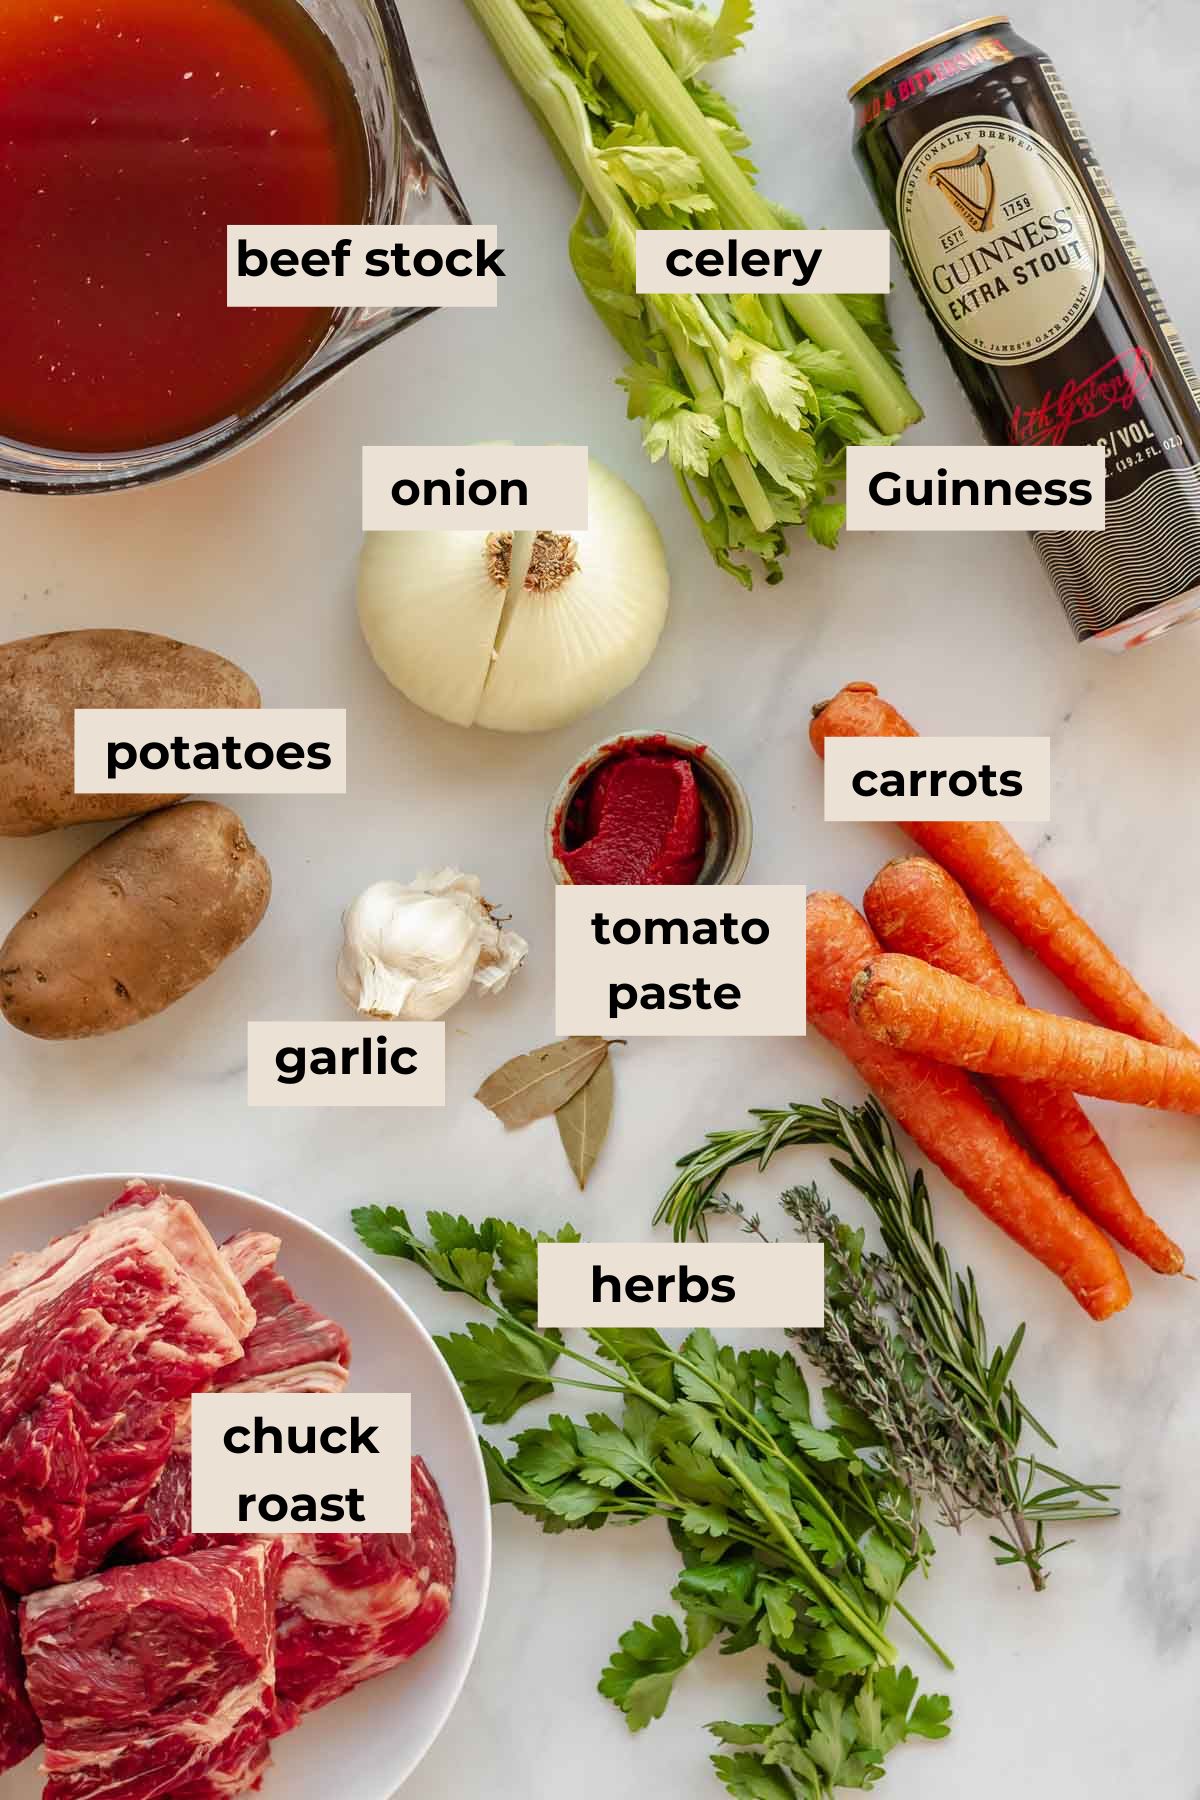 Ingredients for Guinness beef stew.